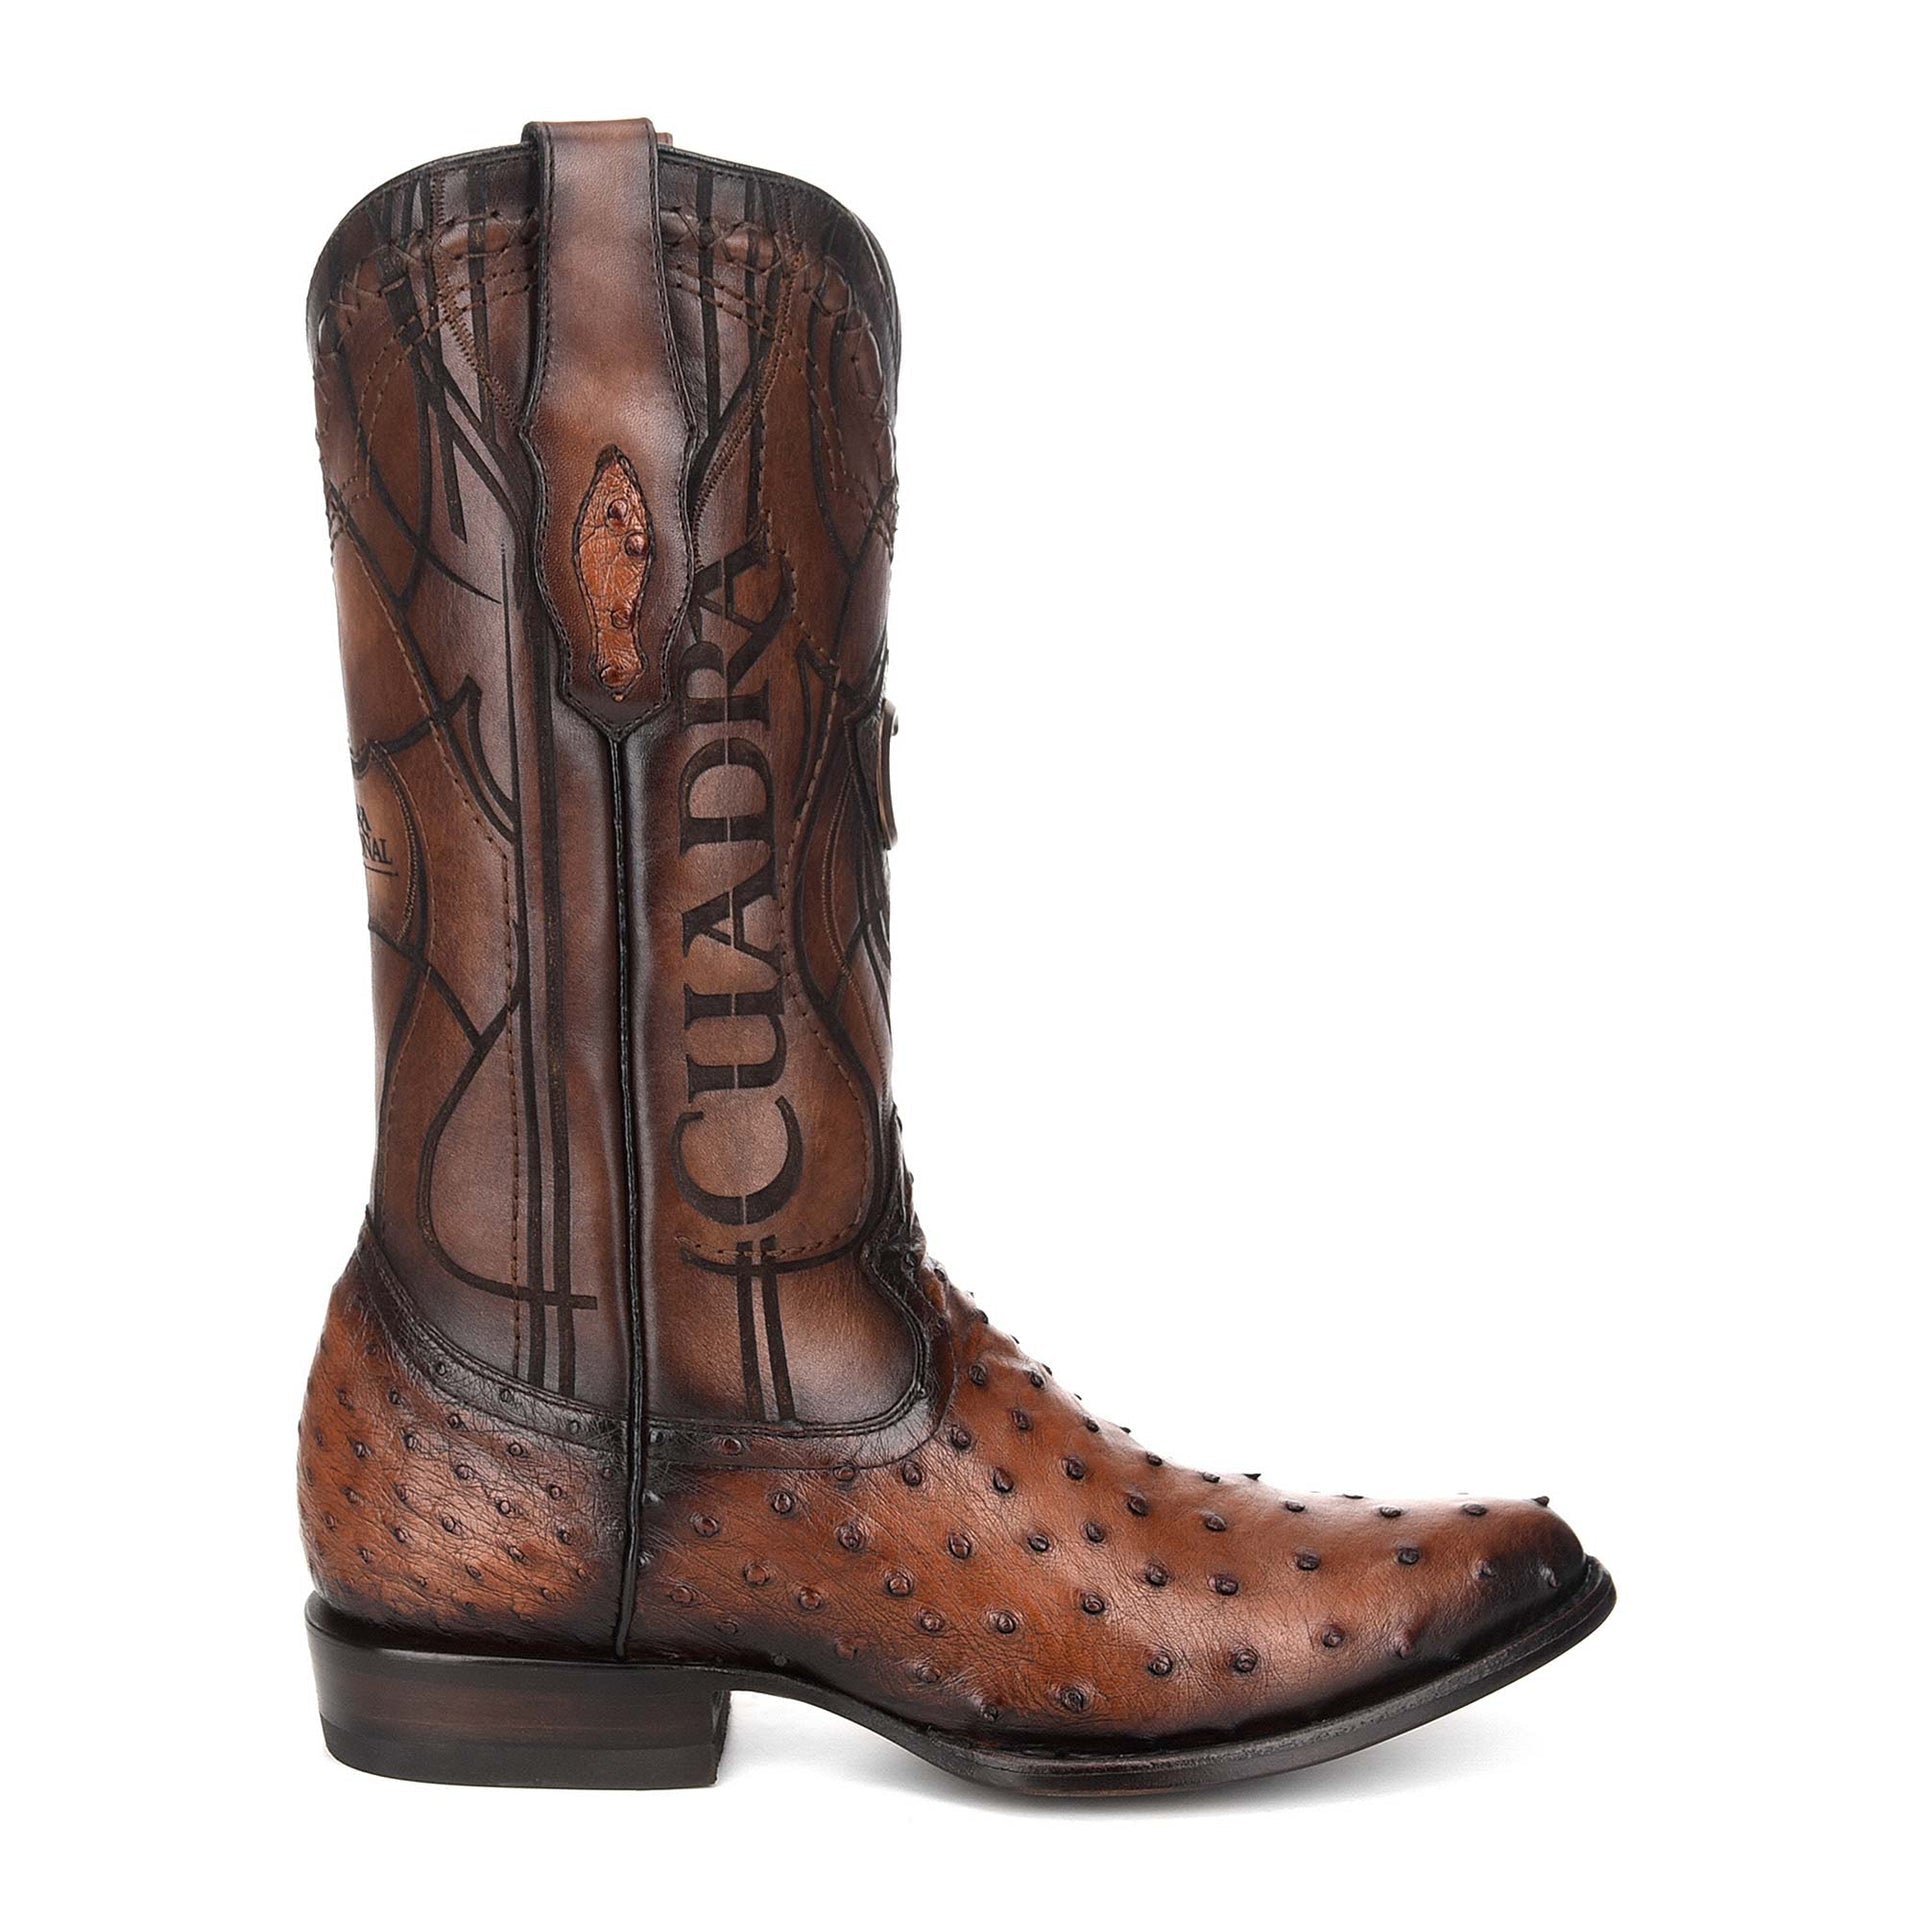 2C1NA1 - Cuadra brown dress cowboy ostrich leather boots for men-Kuet.us